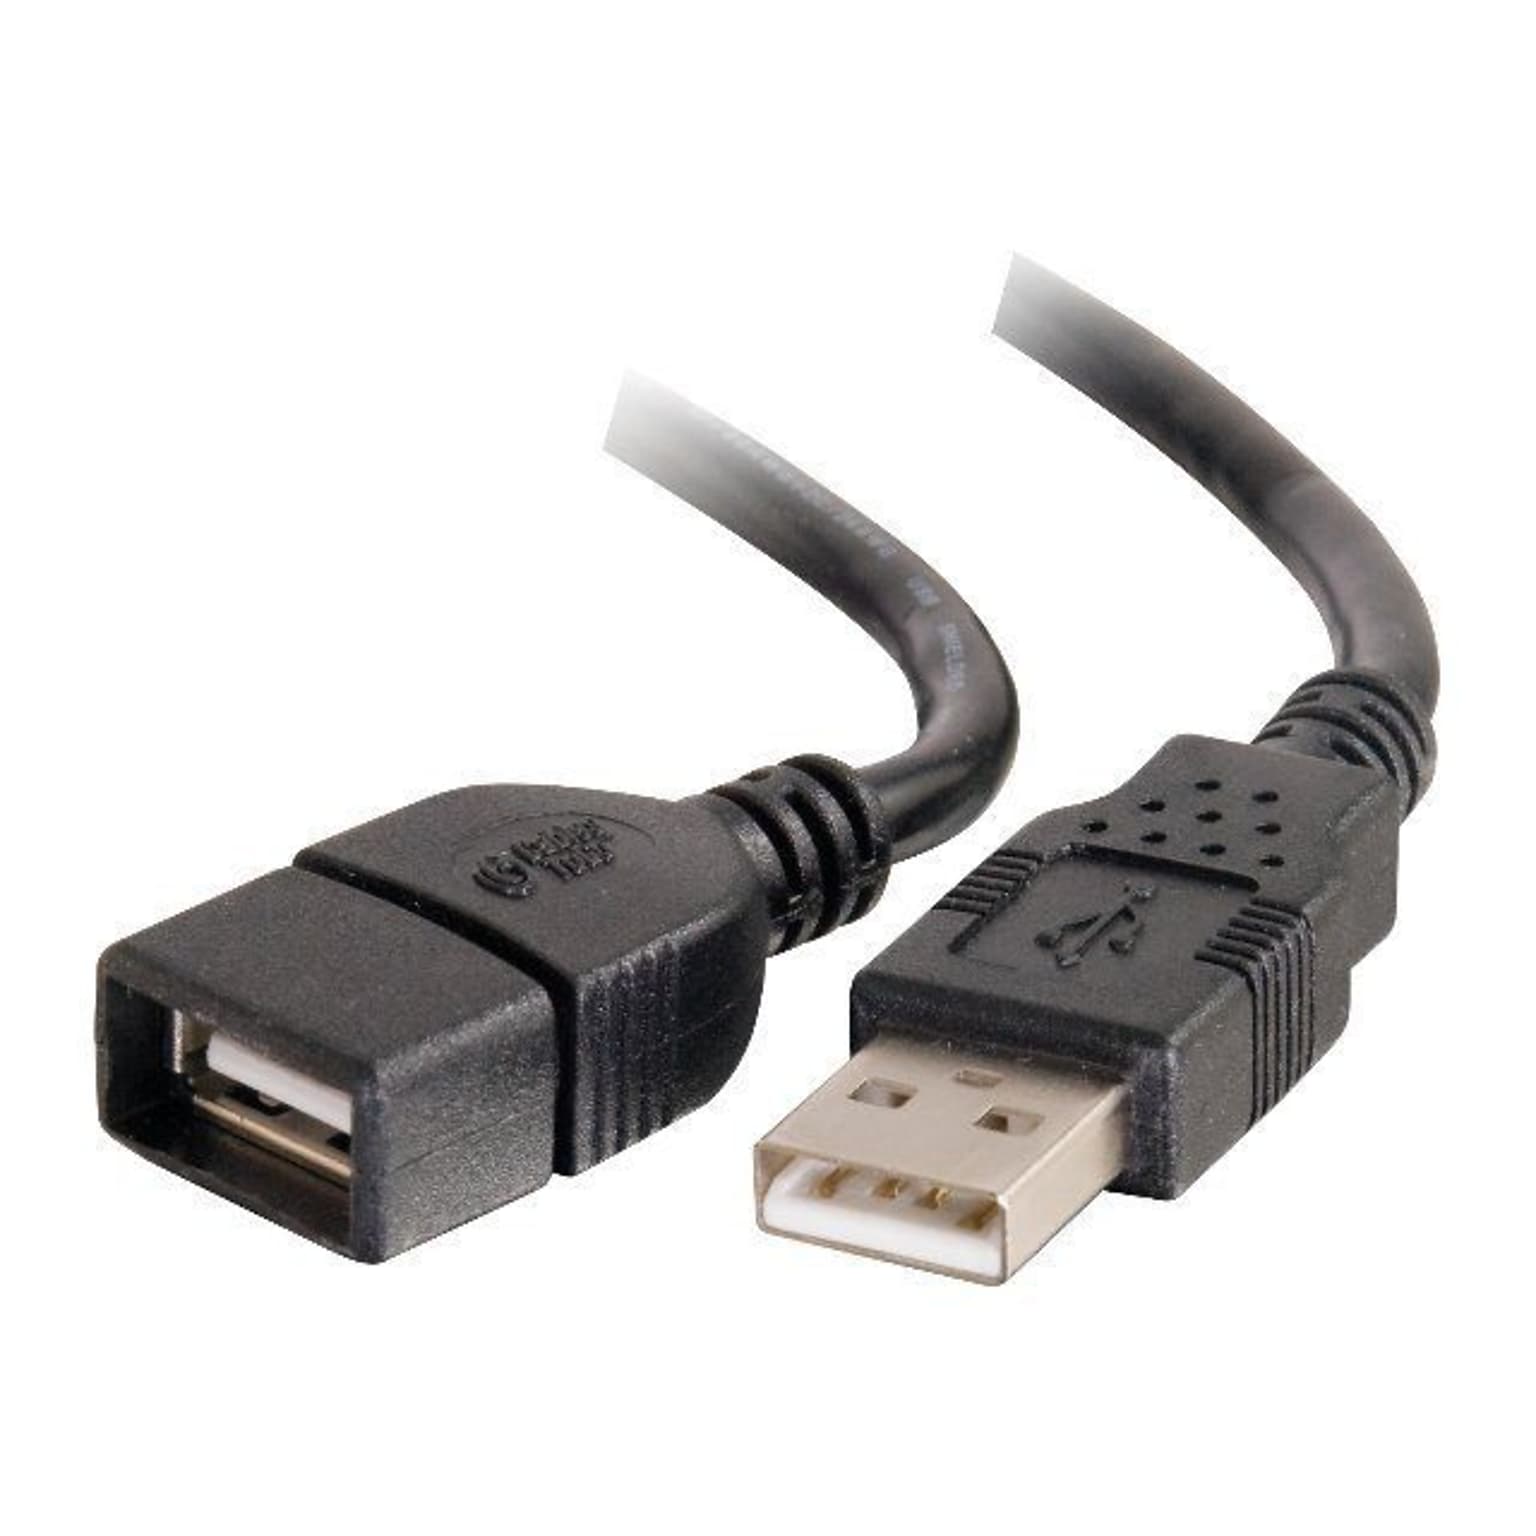 C2G 52108 3 m Type A USB 2.0 to Type A USB 2.0 Male/Female Extension Cable; Black